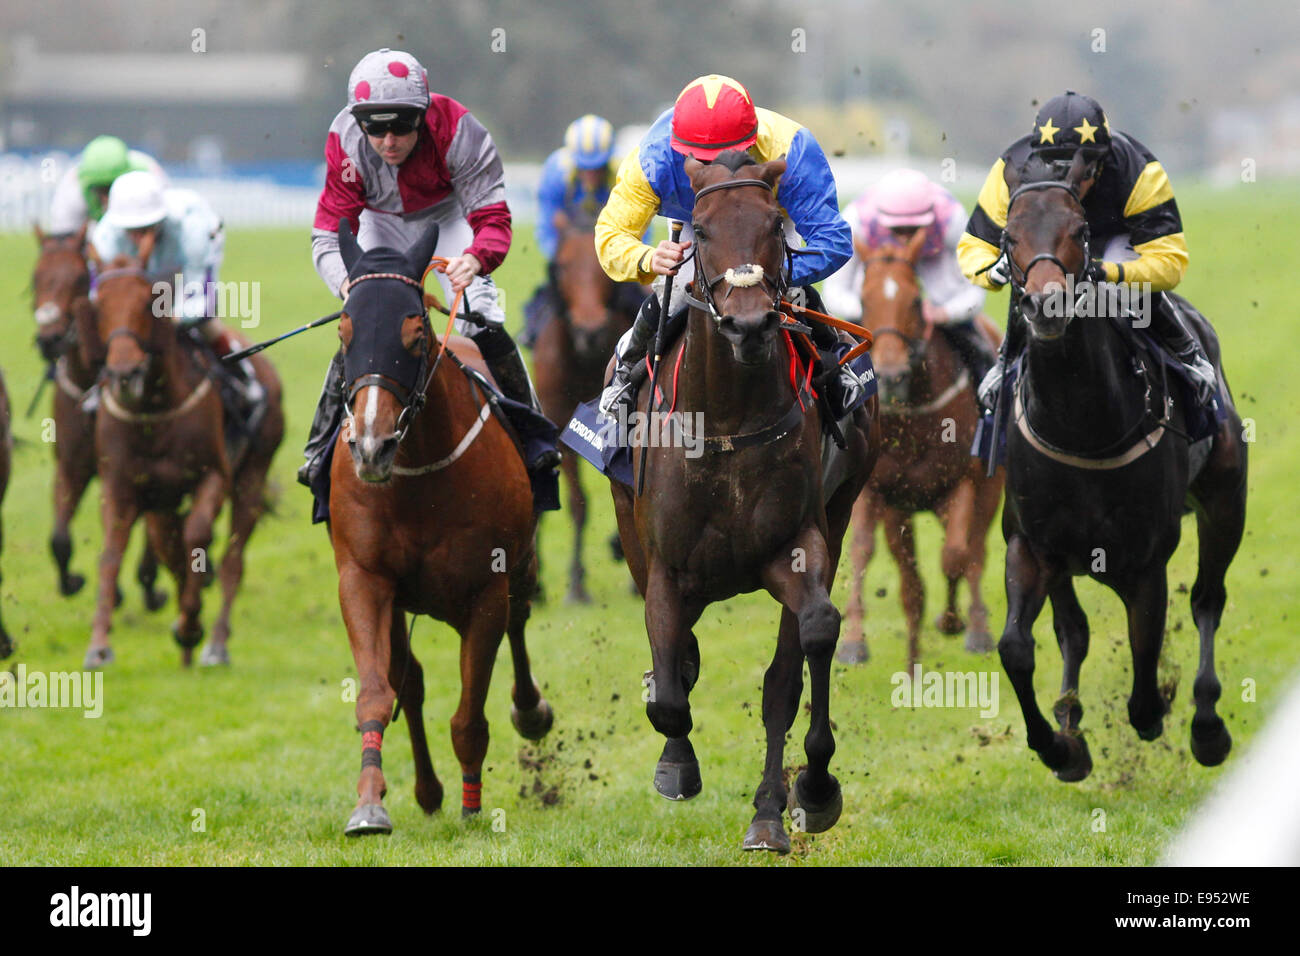 18.10.2014 - Ascot; Gordon Lord Byron, ridden by Wayne Lordan (red cap) wins the Qipco British Champions Sprint Stakes (Group 2). Second place: Tropics, ridden by Robert Winston (grey-red cap). Third place: Jack Dexter, ridden by Graham Lee (black cap). Credit: Lajos-Eric Balogh/turfstock.com Stock Photo